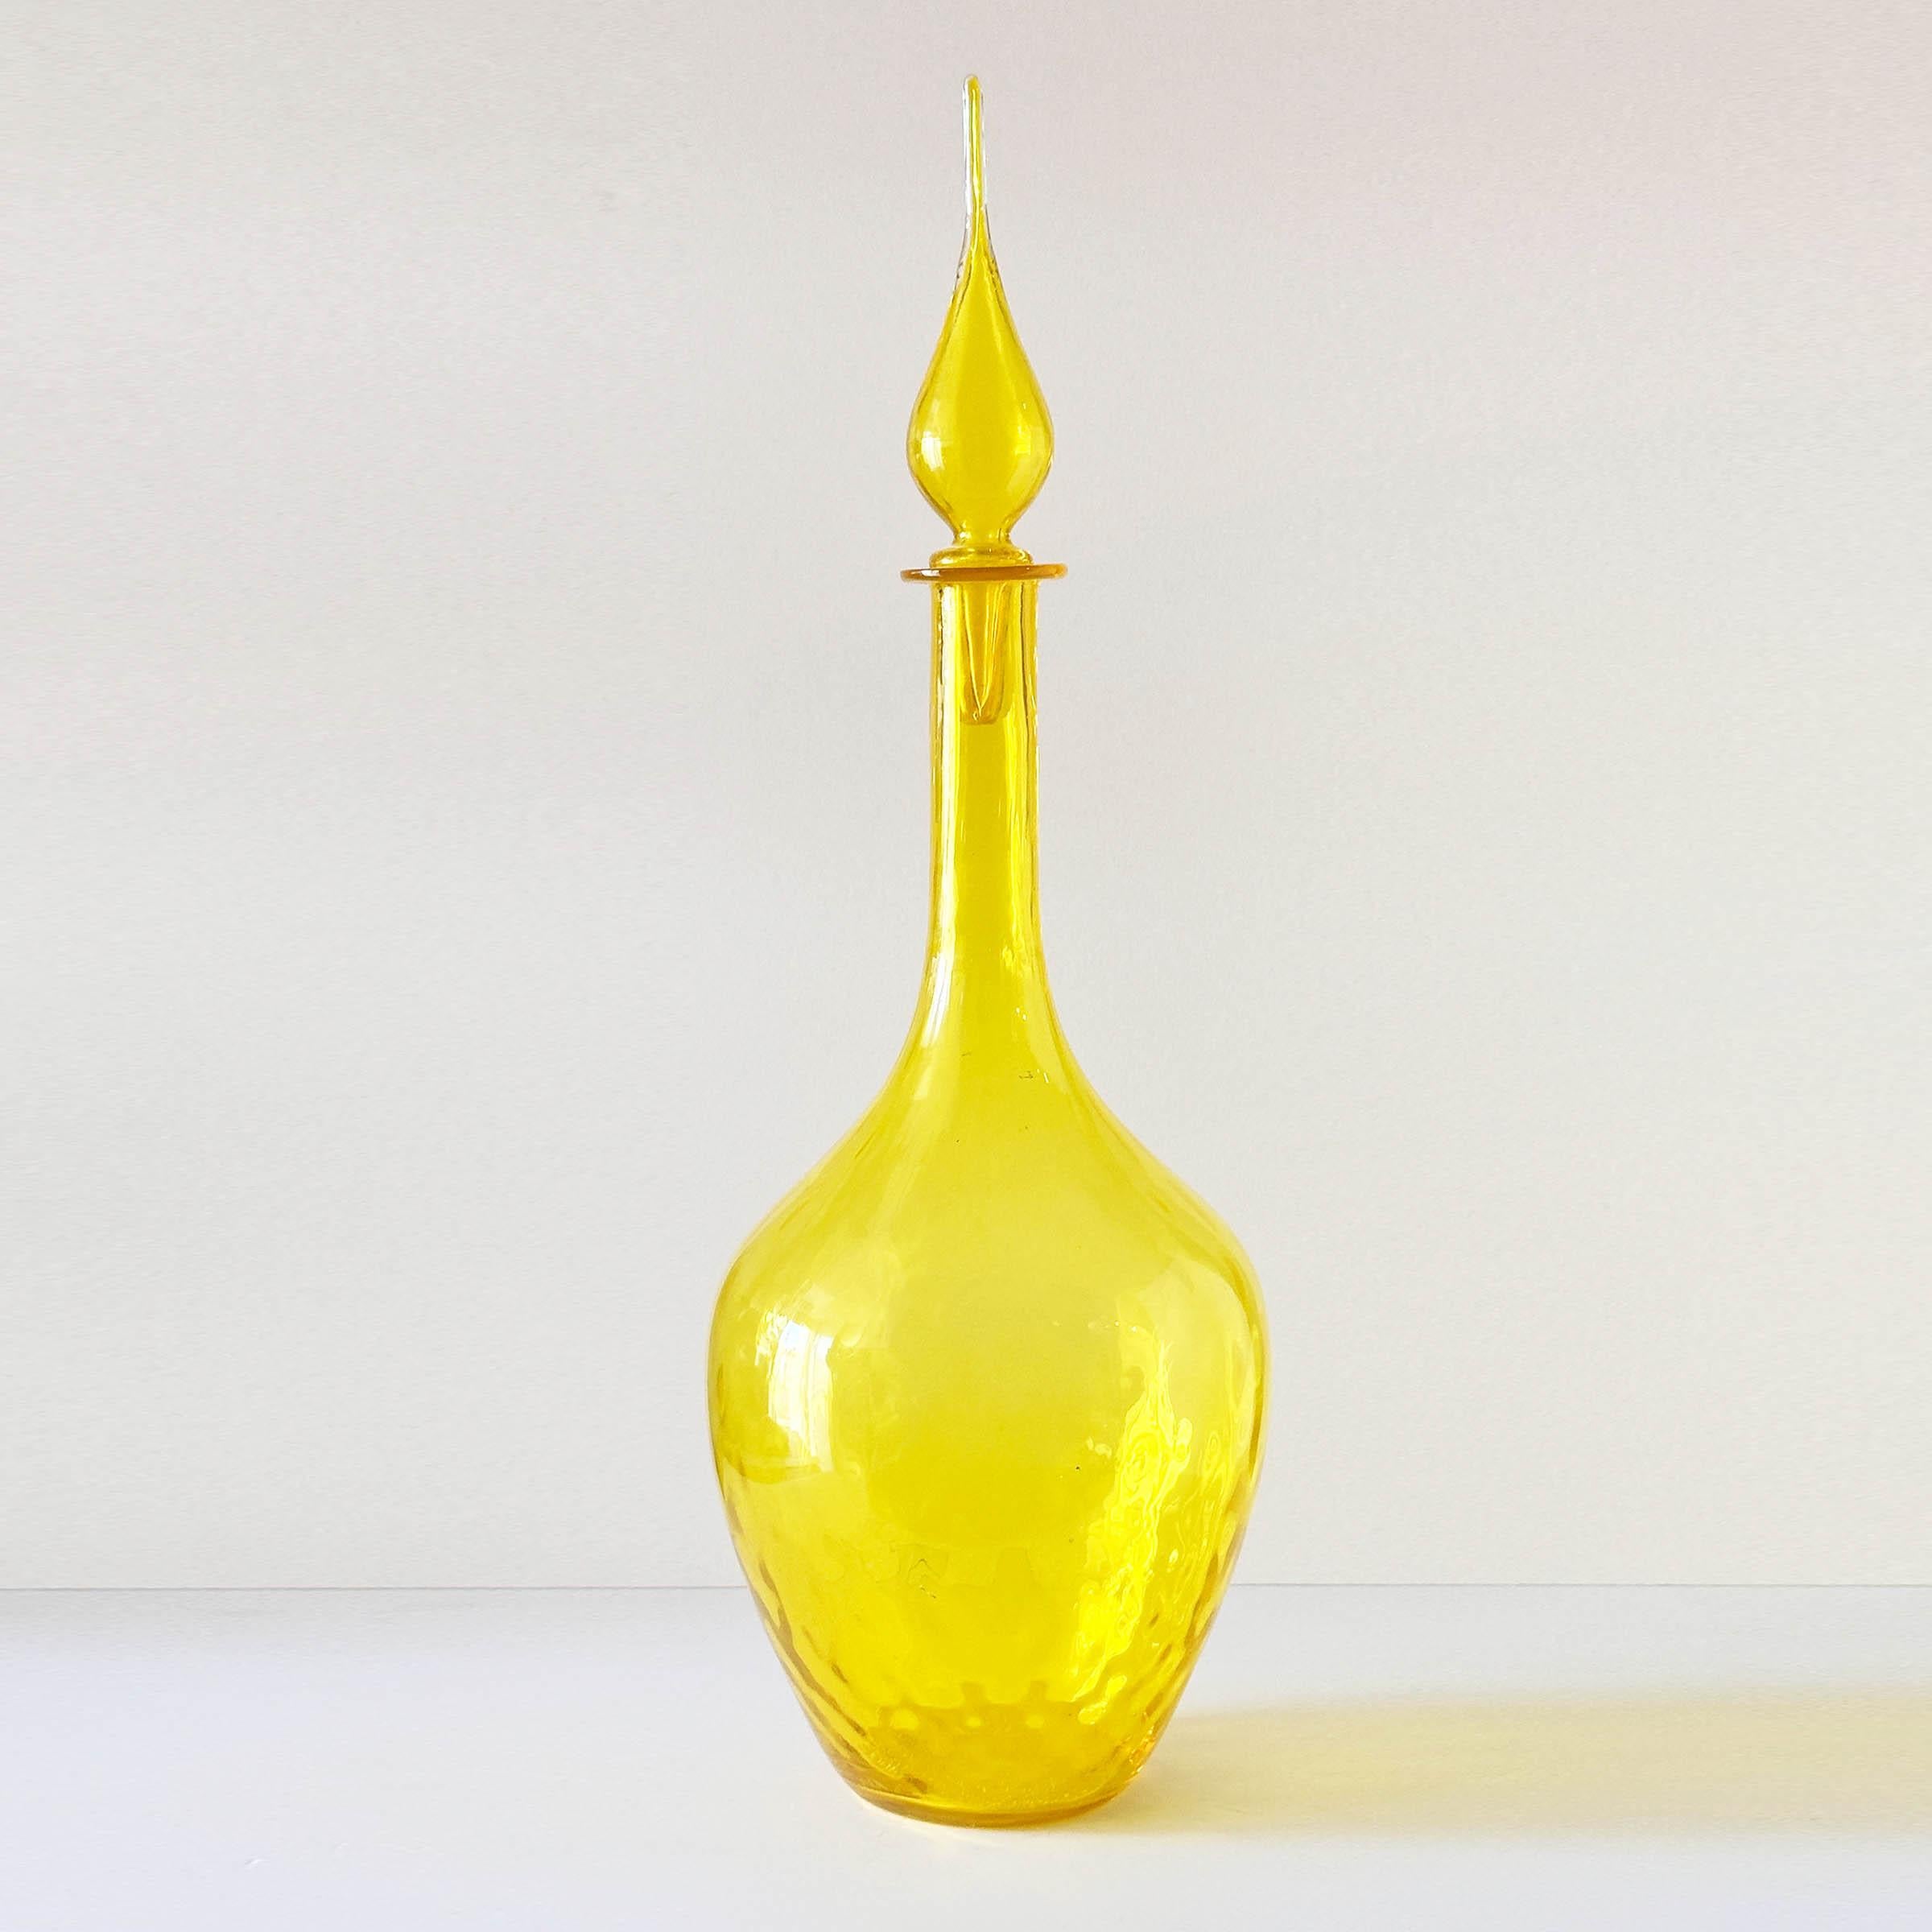 We assume this is by Blenko Glass Company however we’re still combing through their catalogs to find an exact match. It is in their popular Lemon Yellow. It has optical ribbing on the neck and optical rippling on the corpus. The total height with